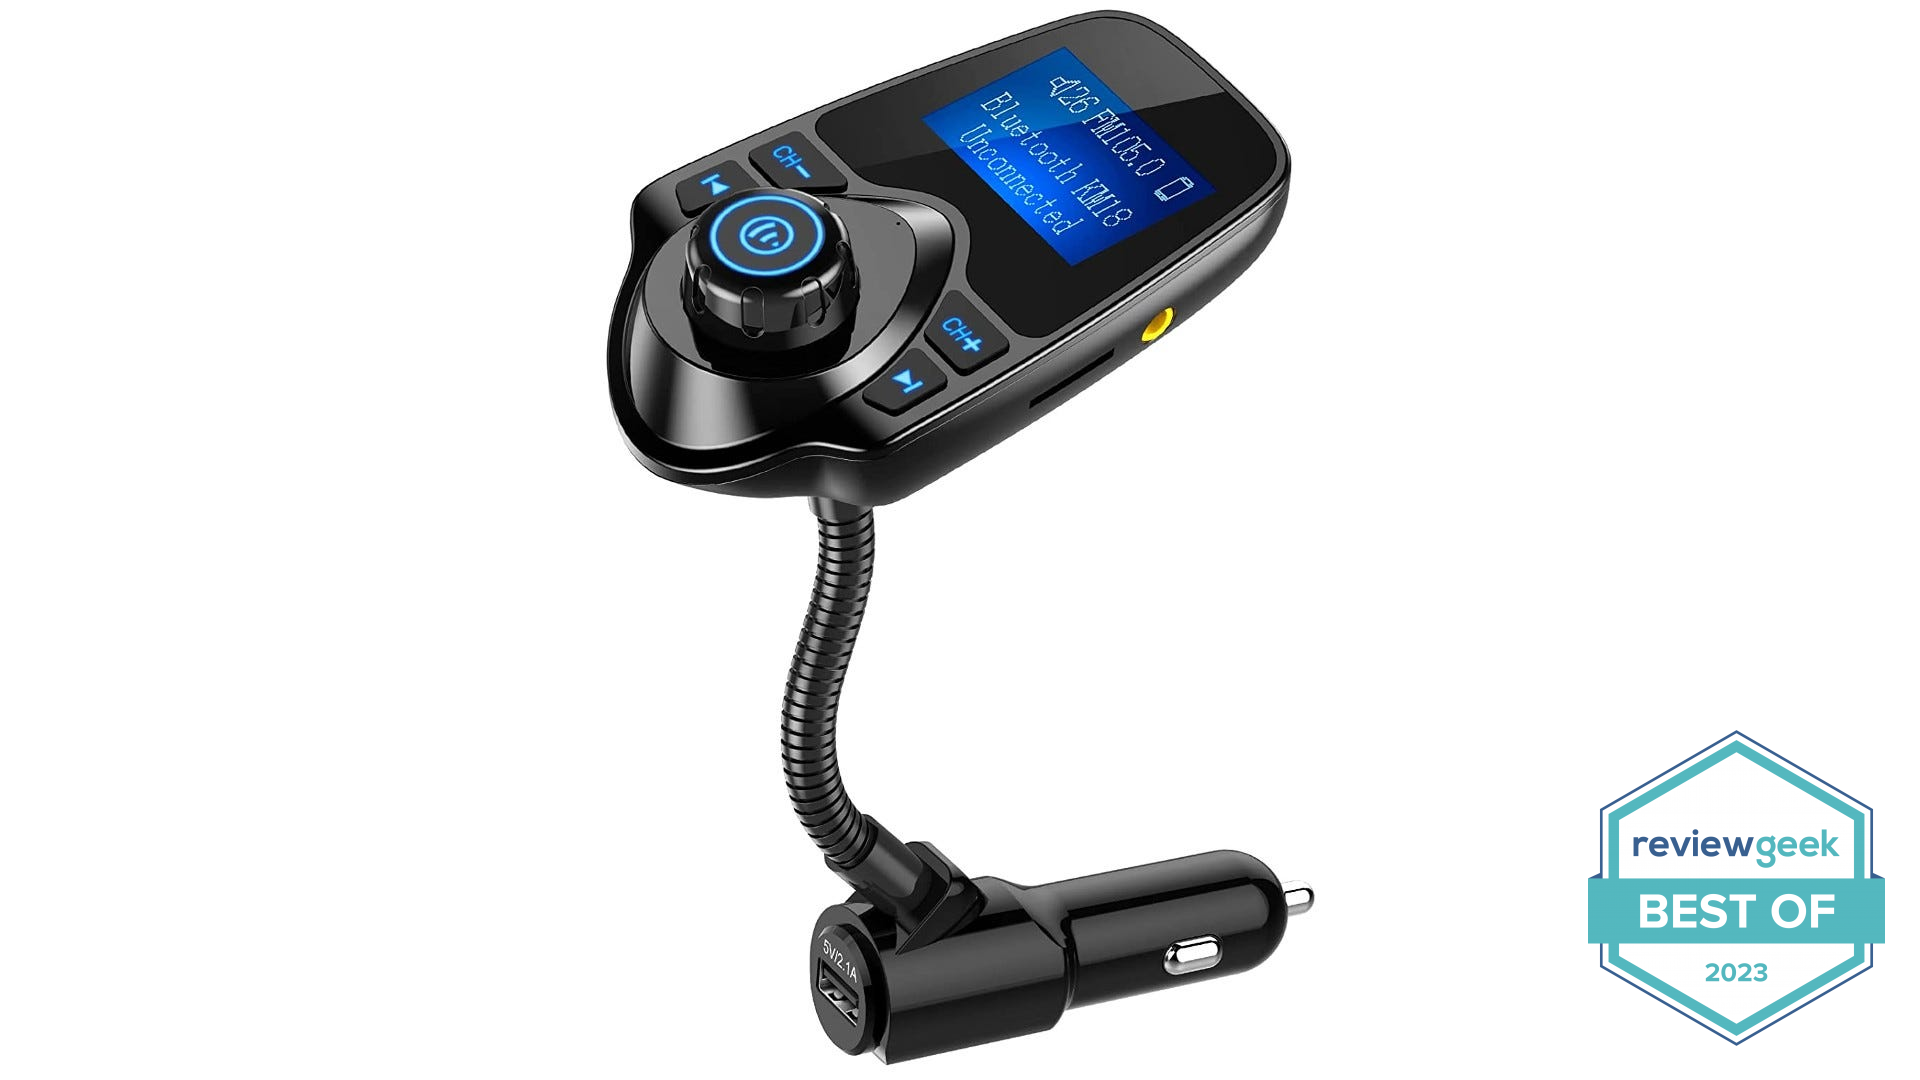 NULAXY KM18 Wireless In-Car Bluetooth FM Transmitter on a white background.